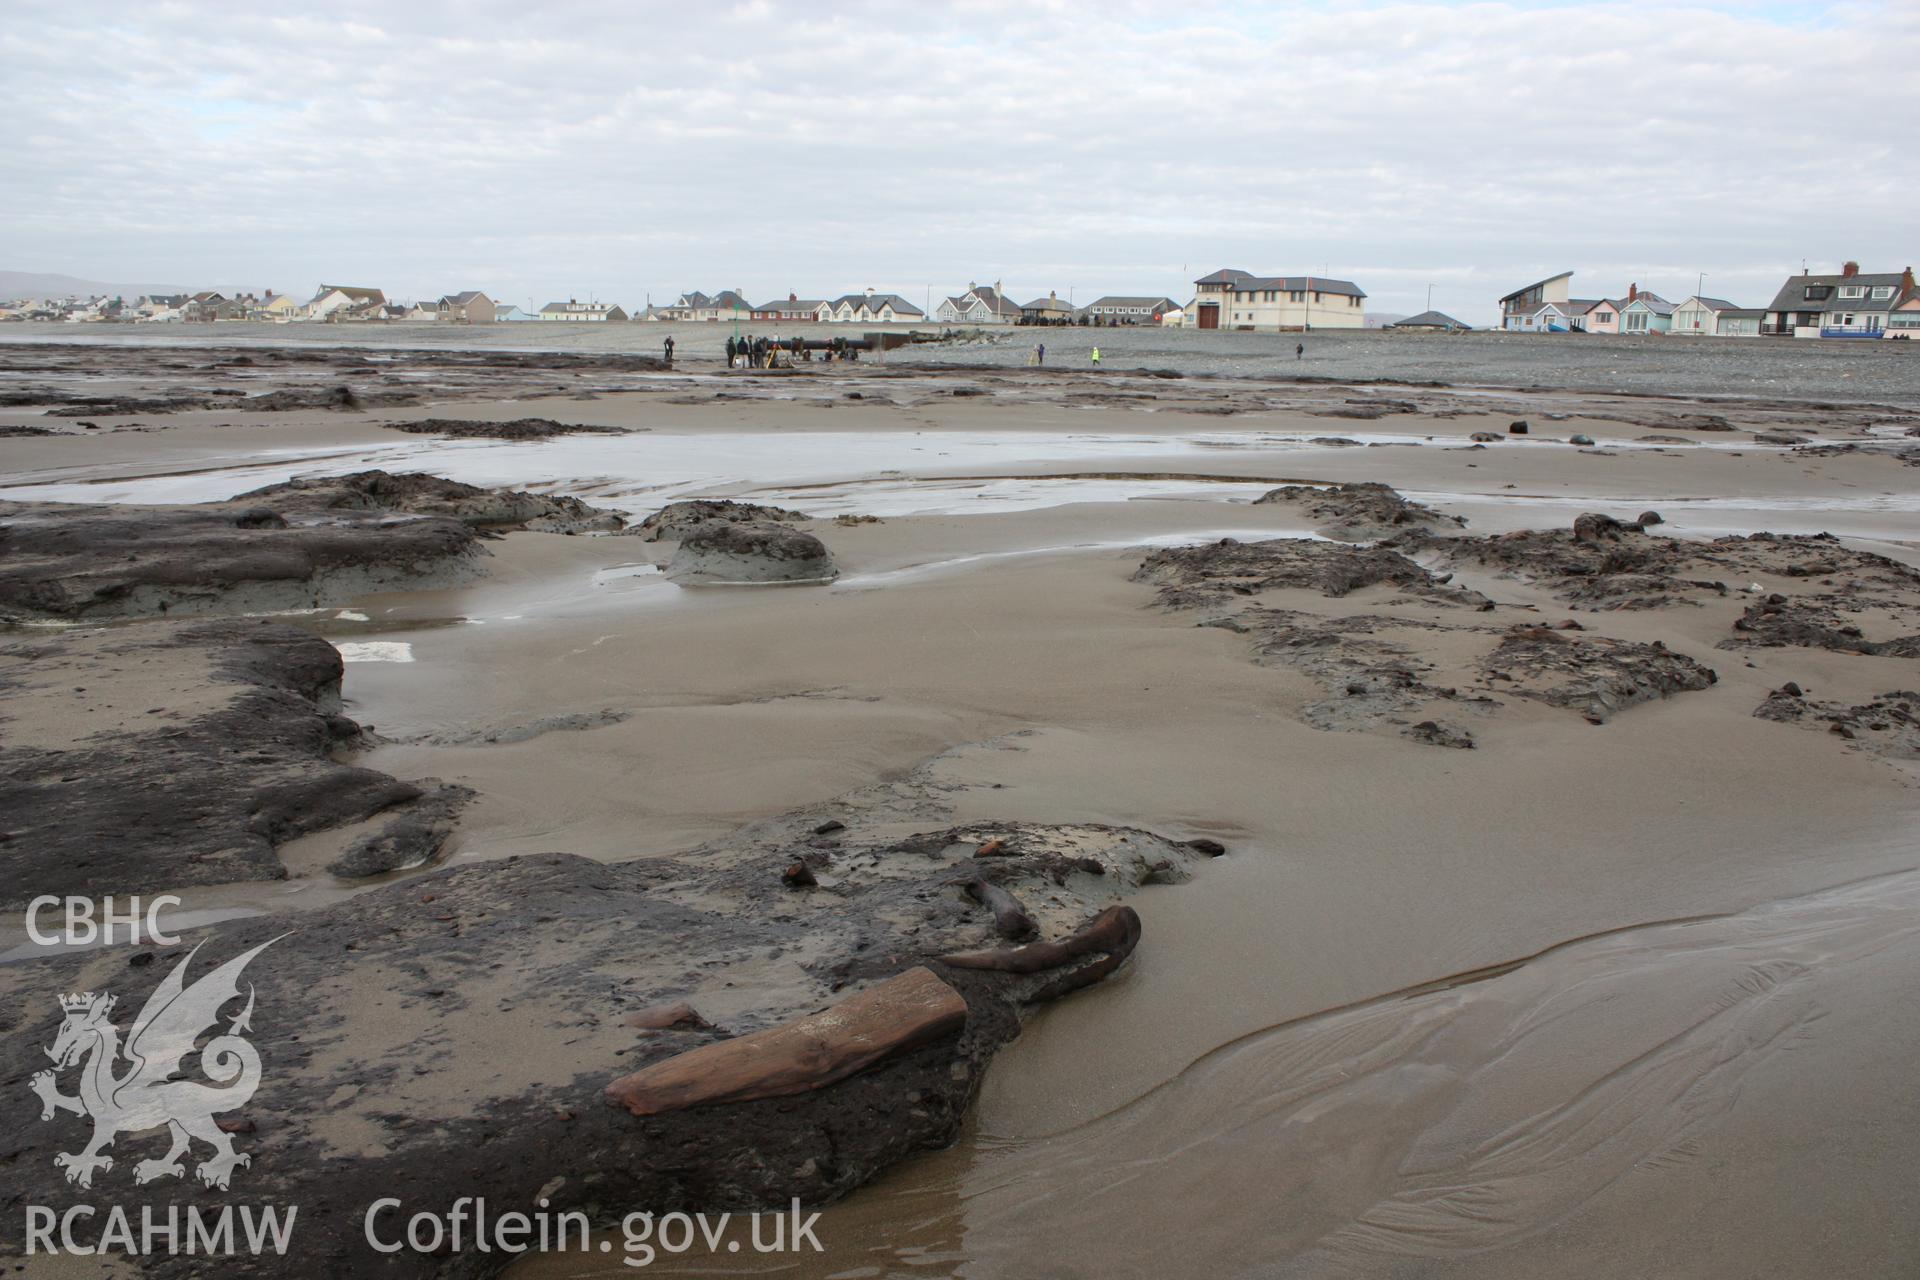 Borth submerged forest (between RNLI lifeboat station and upper Borth), looking east towards High Street and lifeboat station. Showing close-up of peat exposure with preserved tree branch